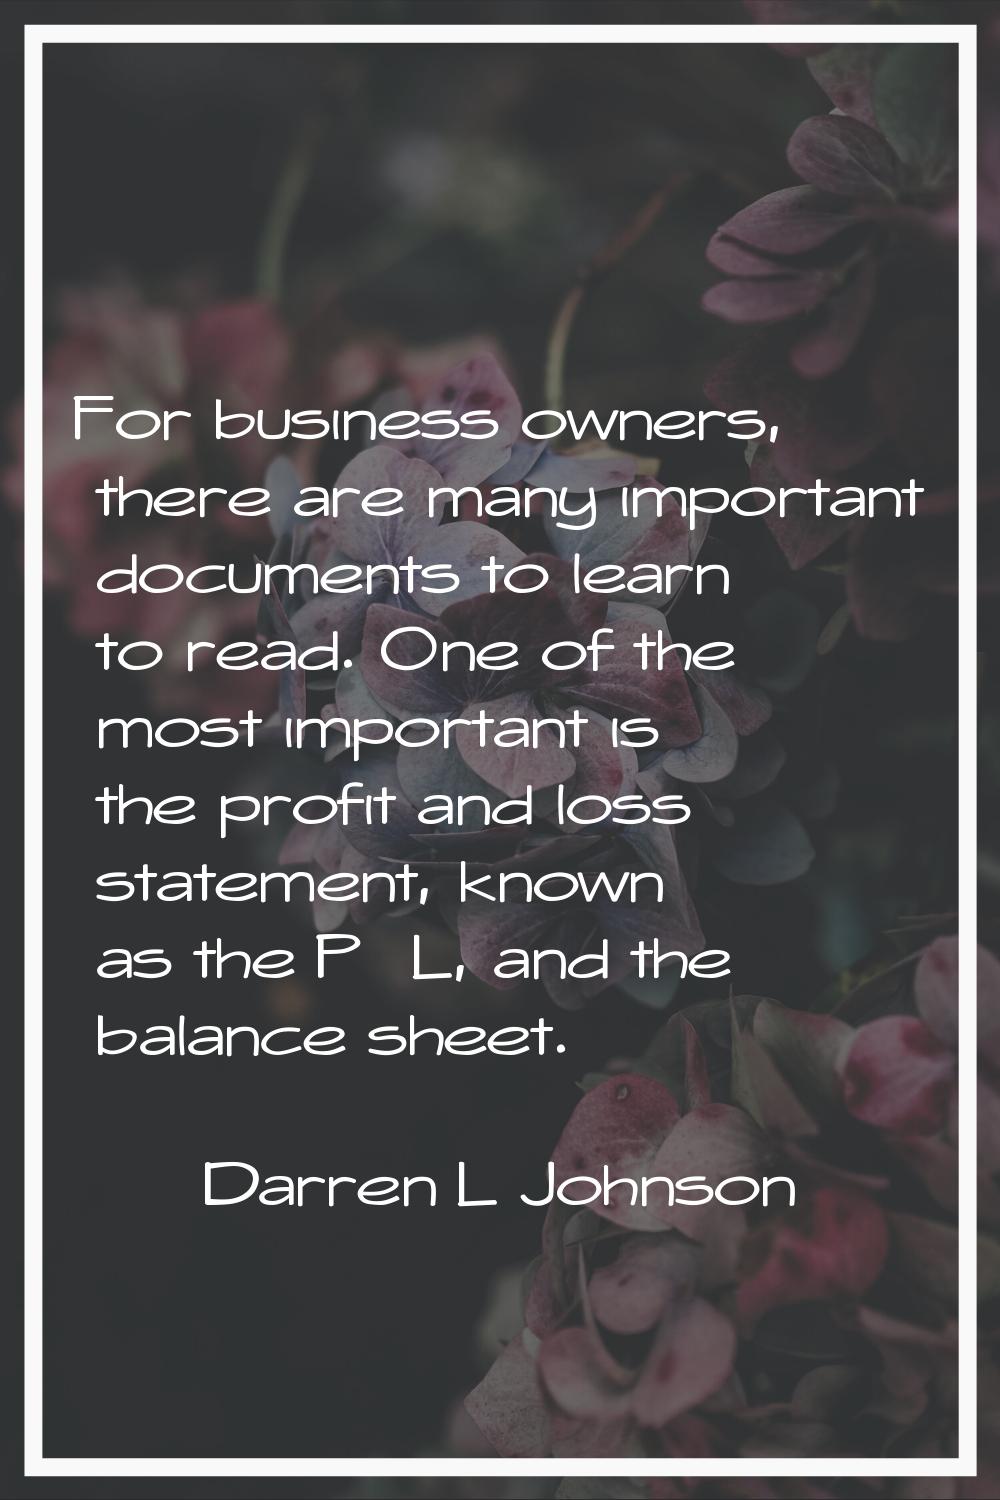 For business owners, there are many important documents to learn to read. One of the most important